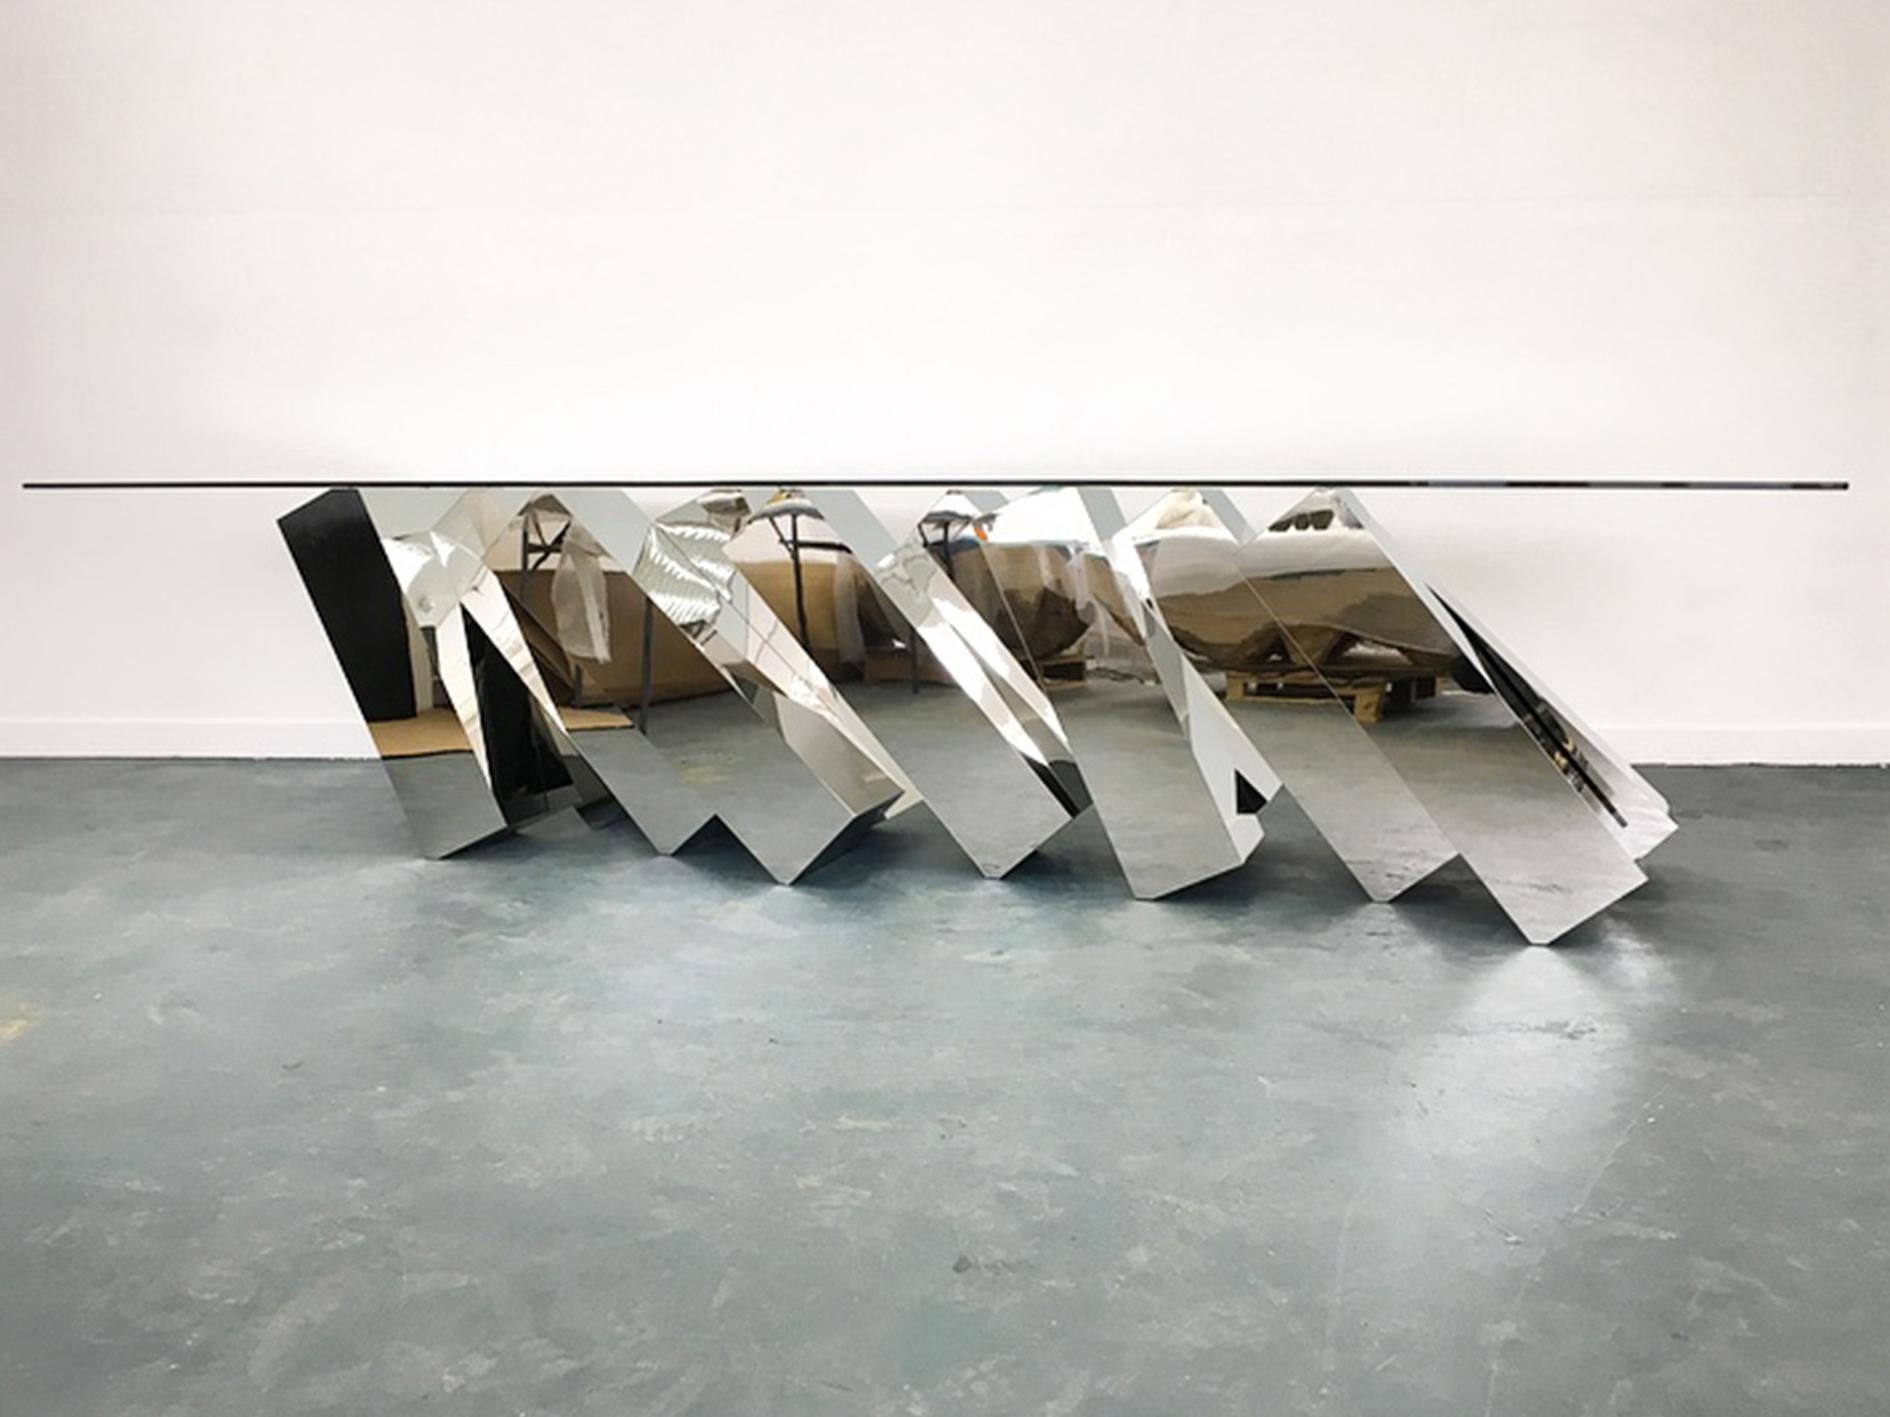 With its glass table balancing miraculously on top of a series toppling, mirror-polished monoliths, Duffy London’s mind-boggling creation appears to defy the laws of physics by remaining in a permanent state of impending collapse.

The monolithic